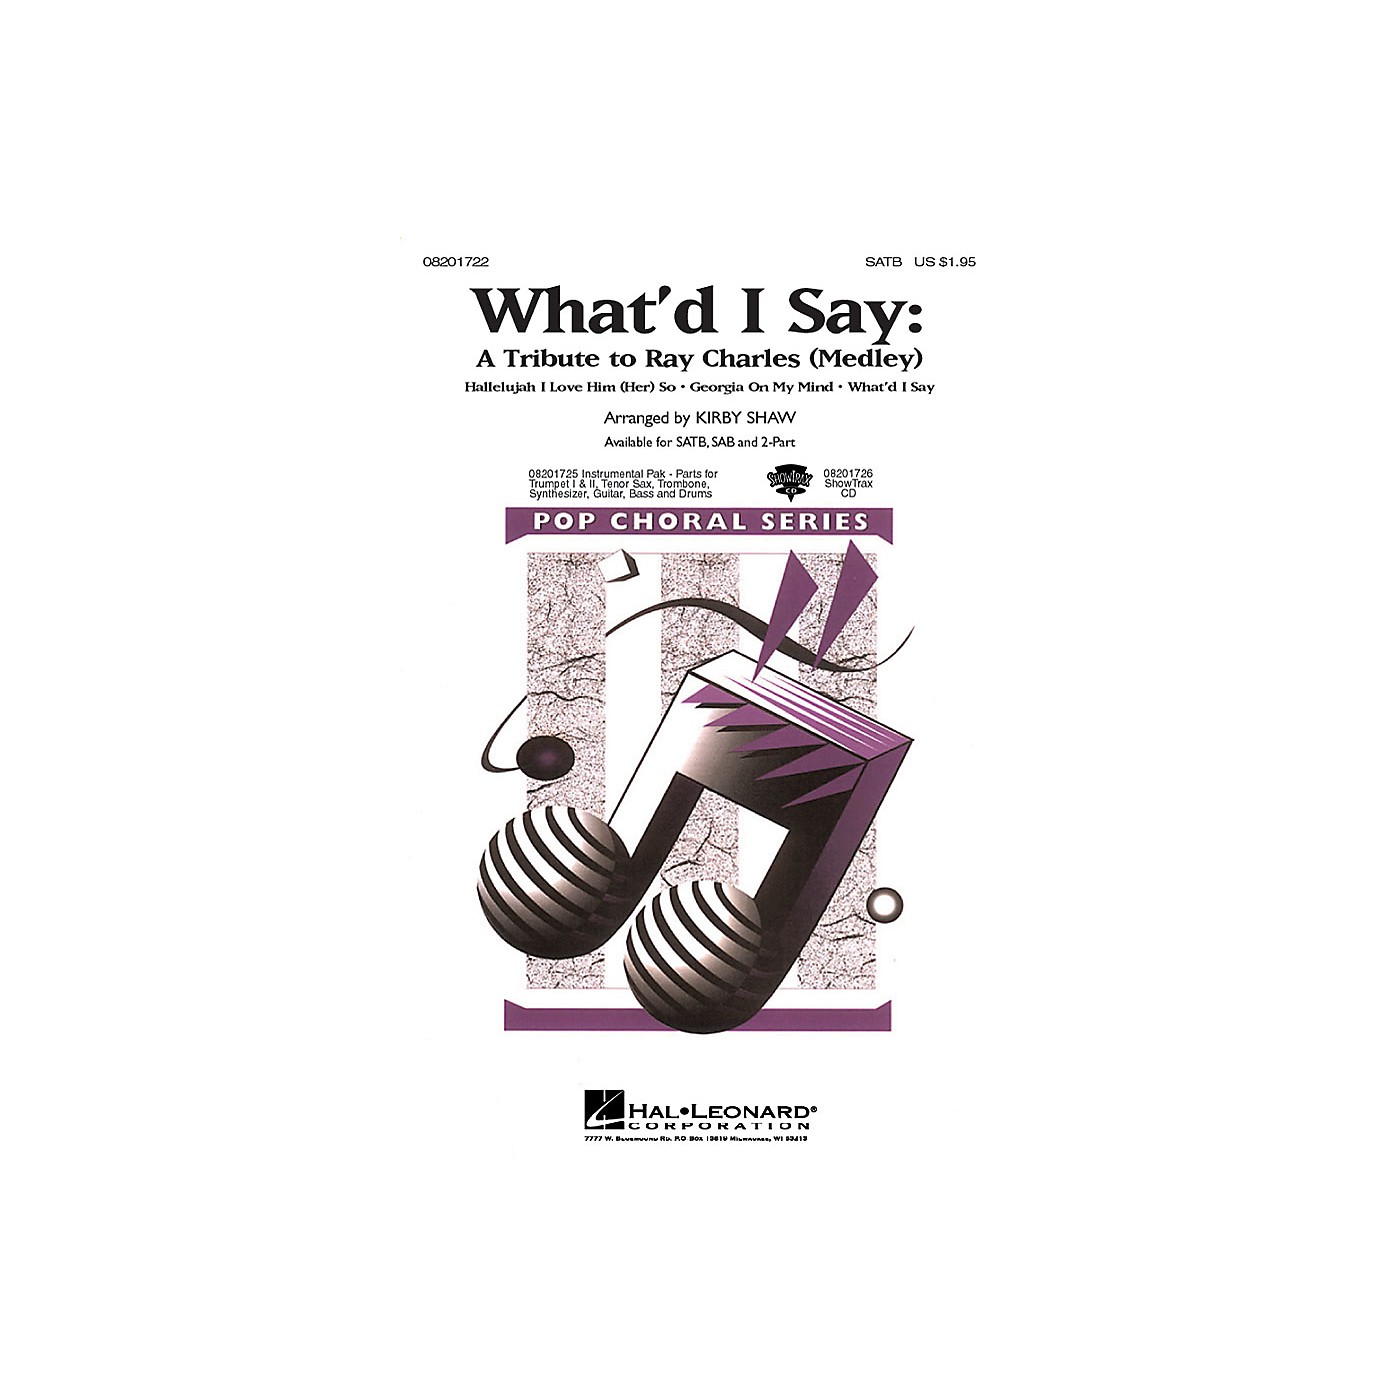 Hal Leonard What'd I Say - A Tribute to Ray Charles (Medley) 2-Part by Ray Charles Arranged by Kirby Shaw thumbnail